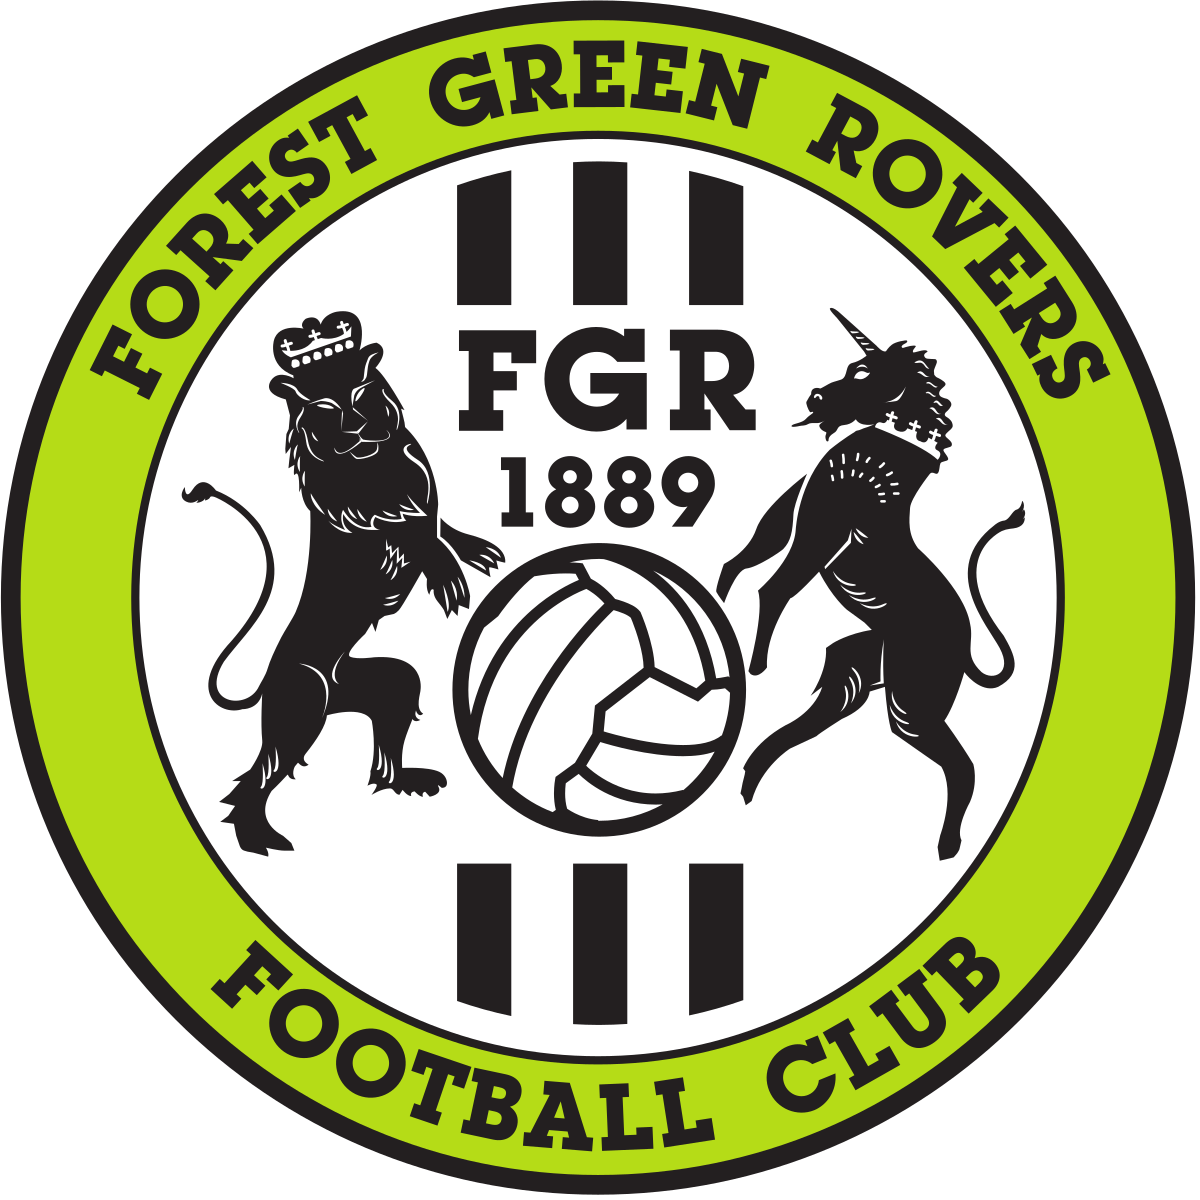 1200px-forest_green_rovers_crest.svg.png